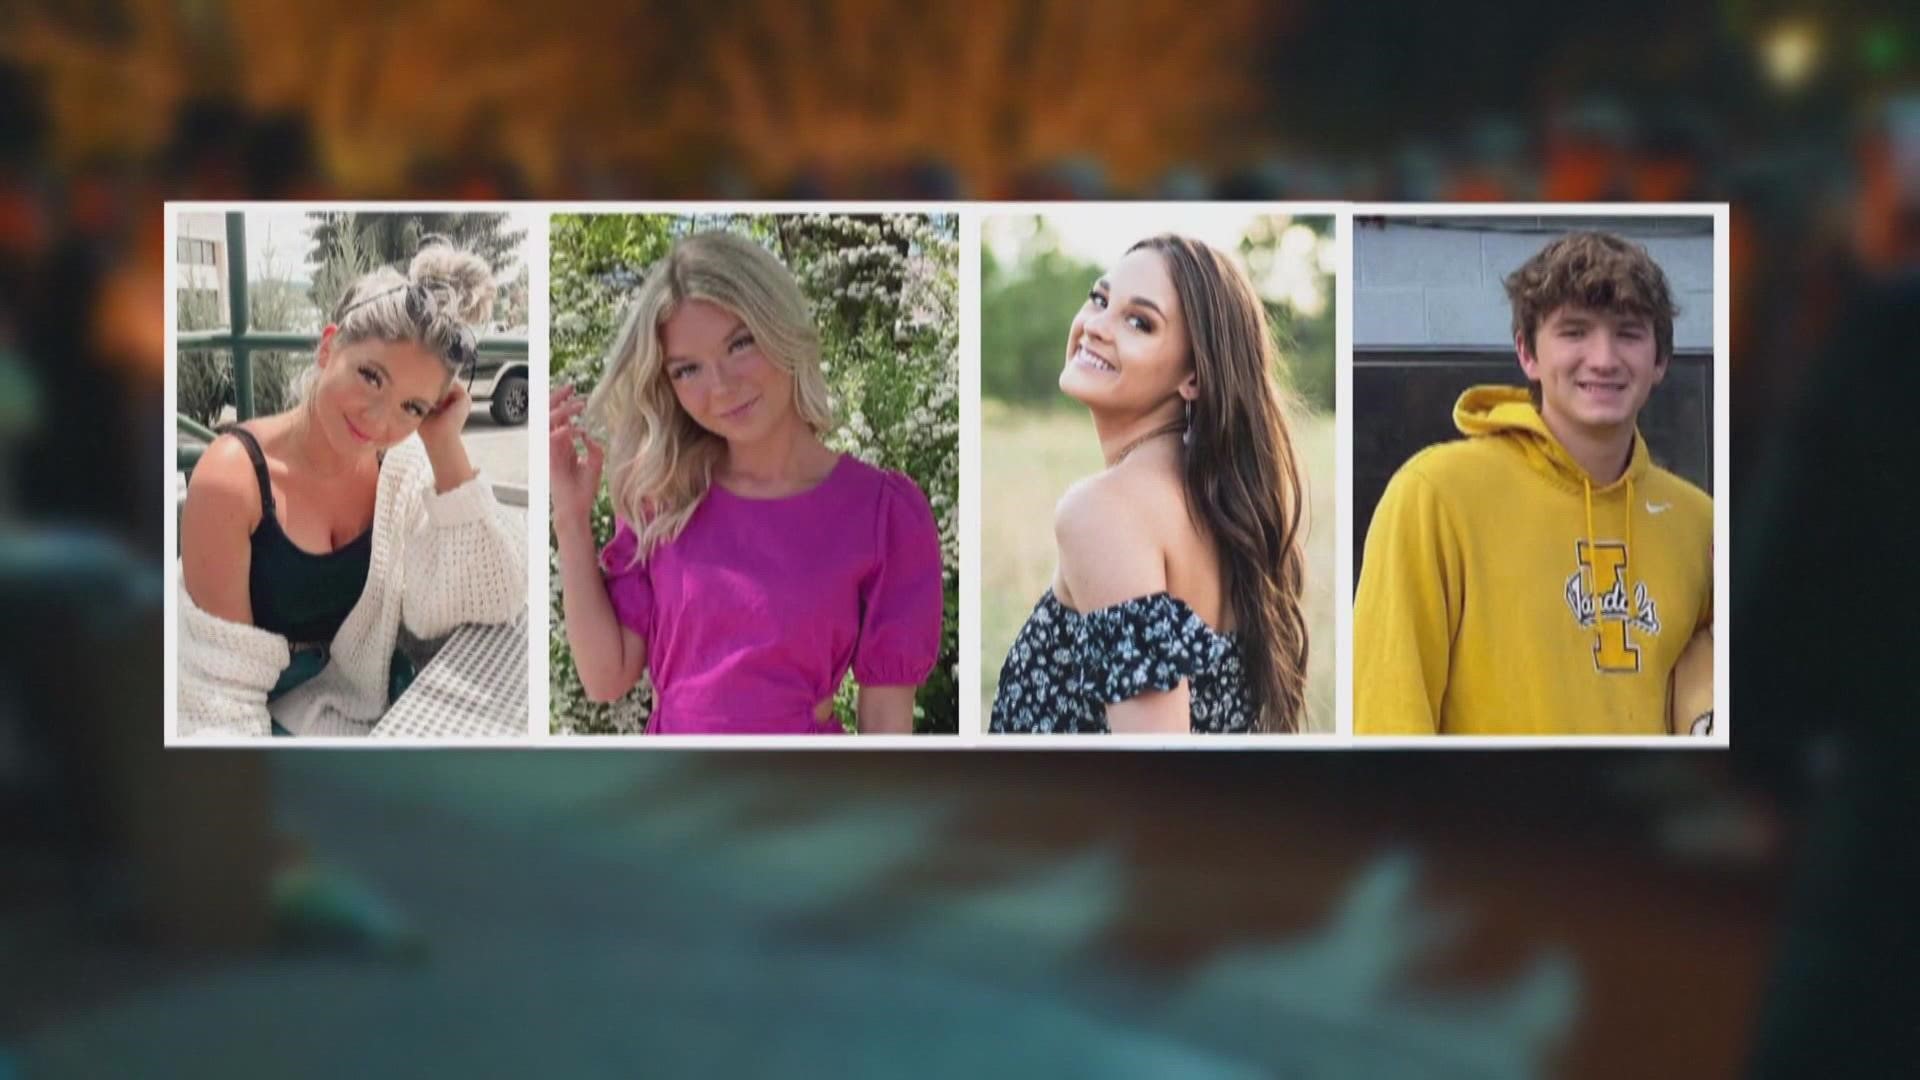 Investigators said they are looking into over a thousand tips that were submitted after four University of Idaho students were murdered in an off-campus home.